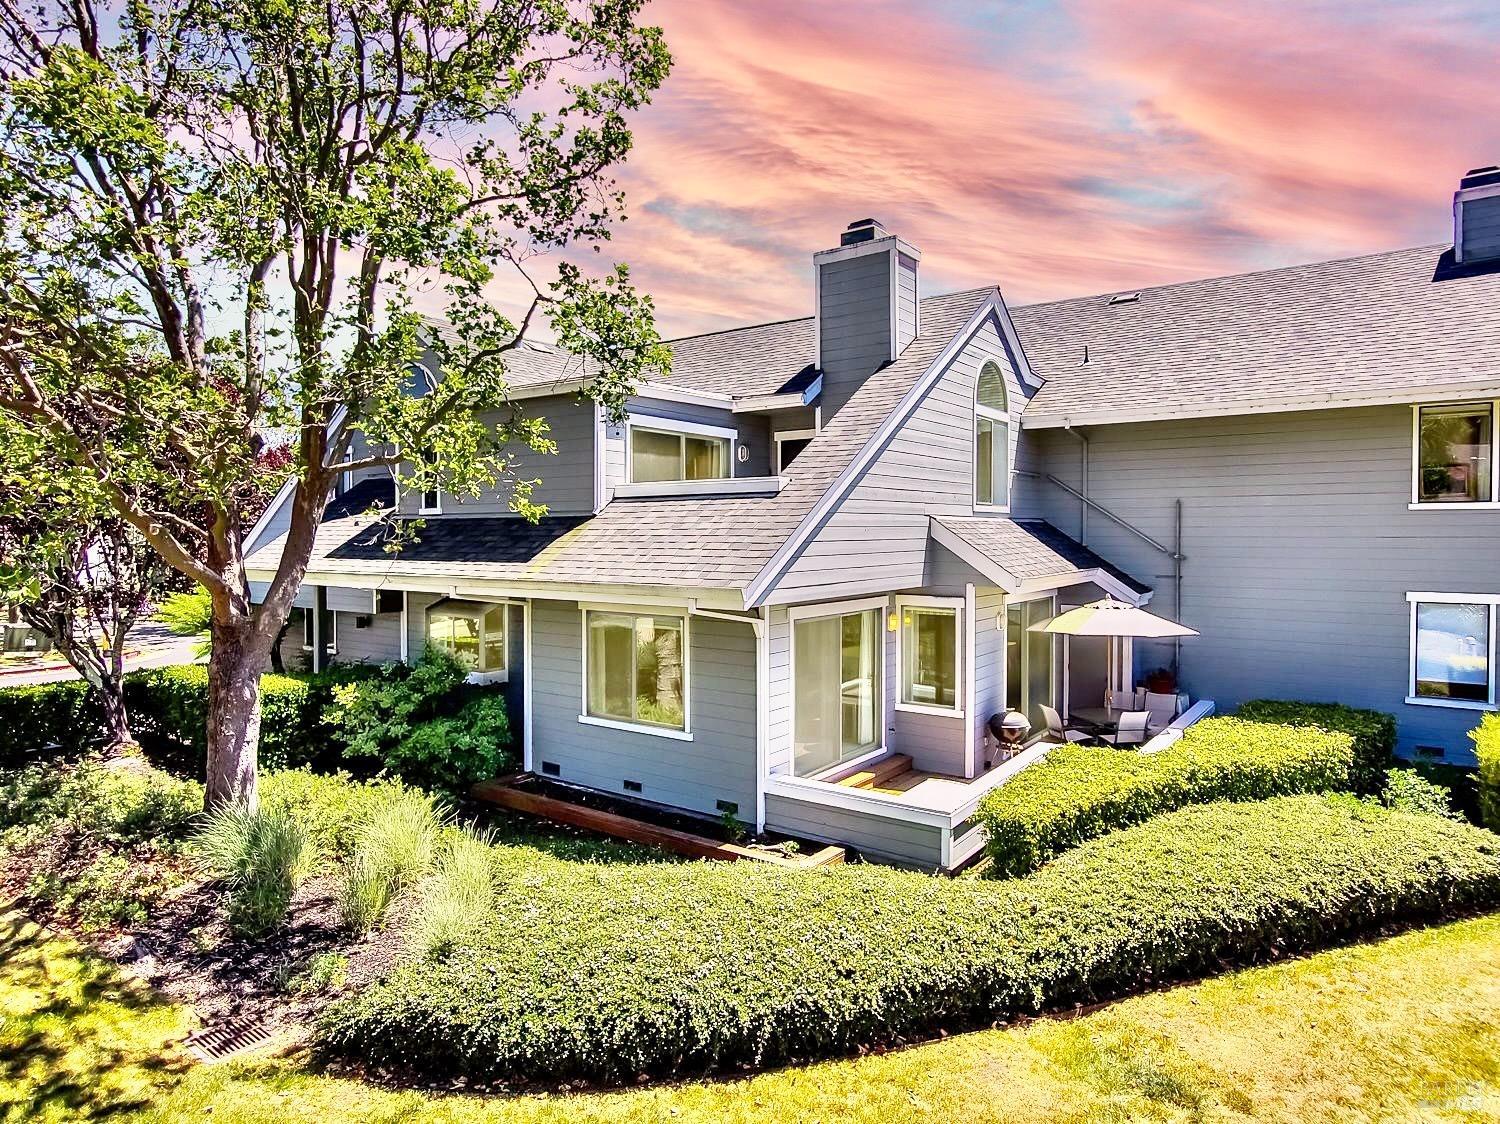 Photo of 6022 Shelter Bay Ave in Mill Valley, CA